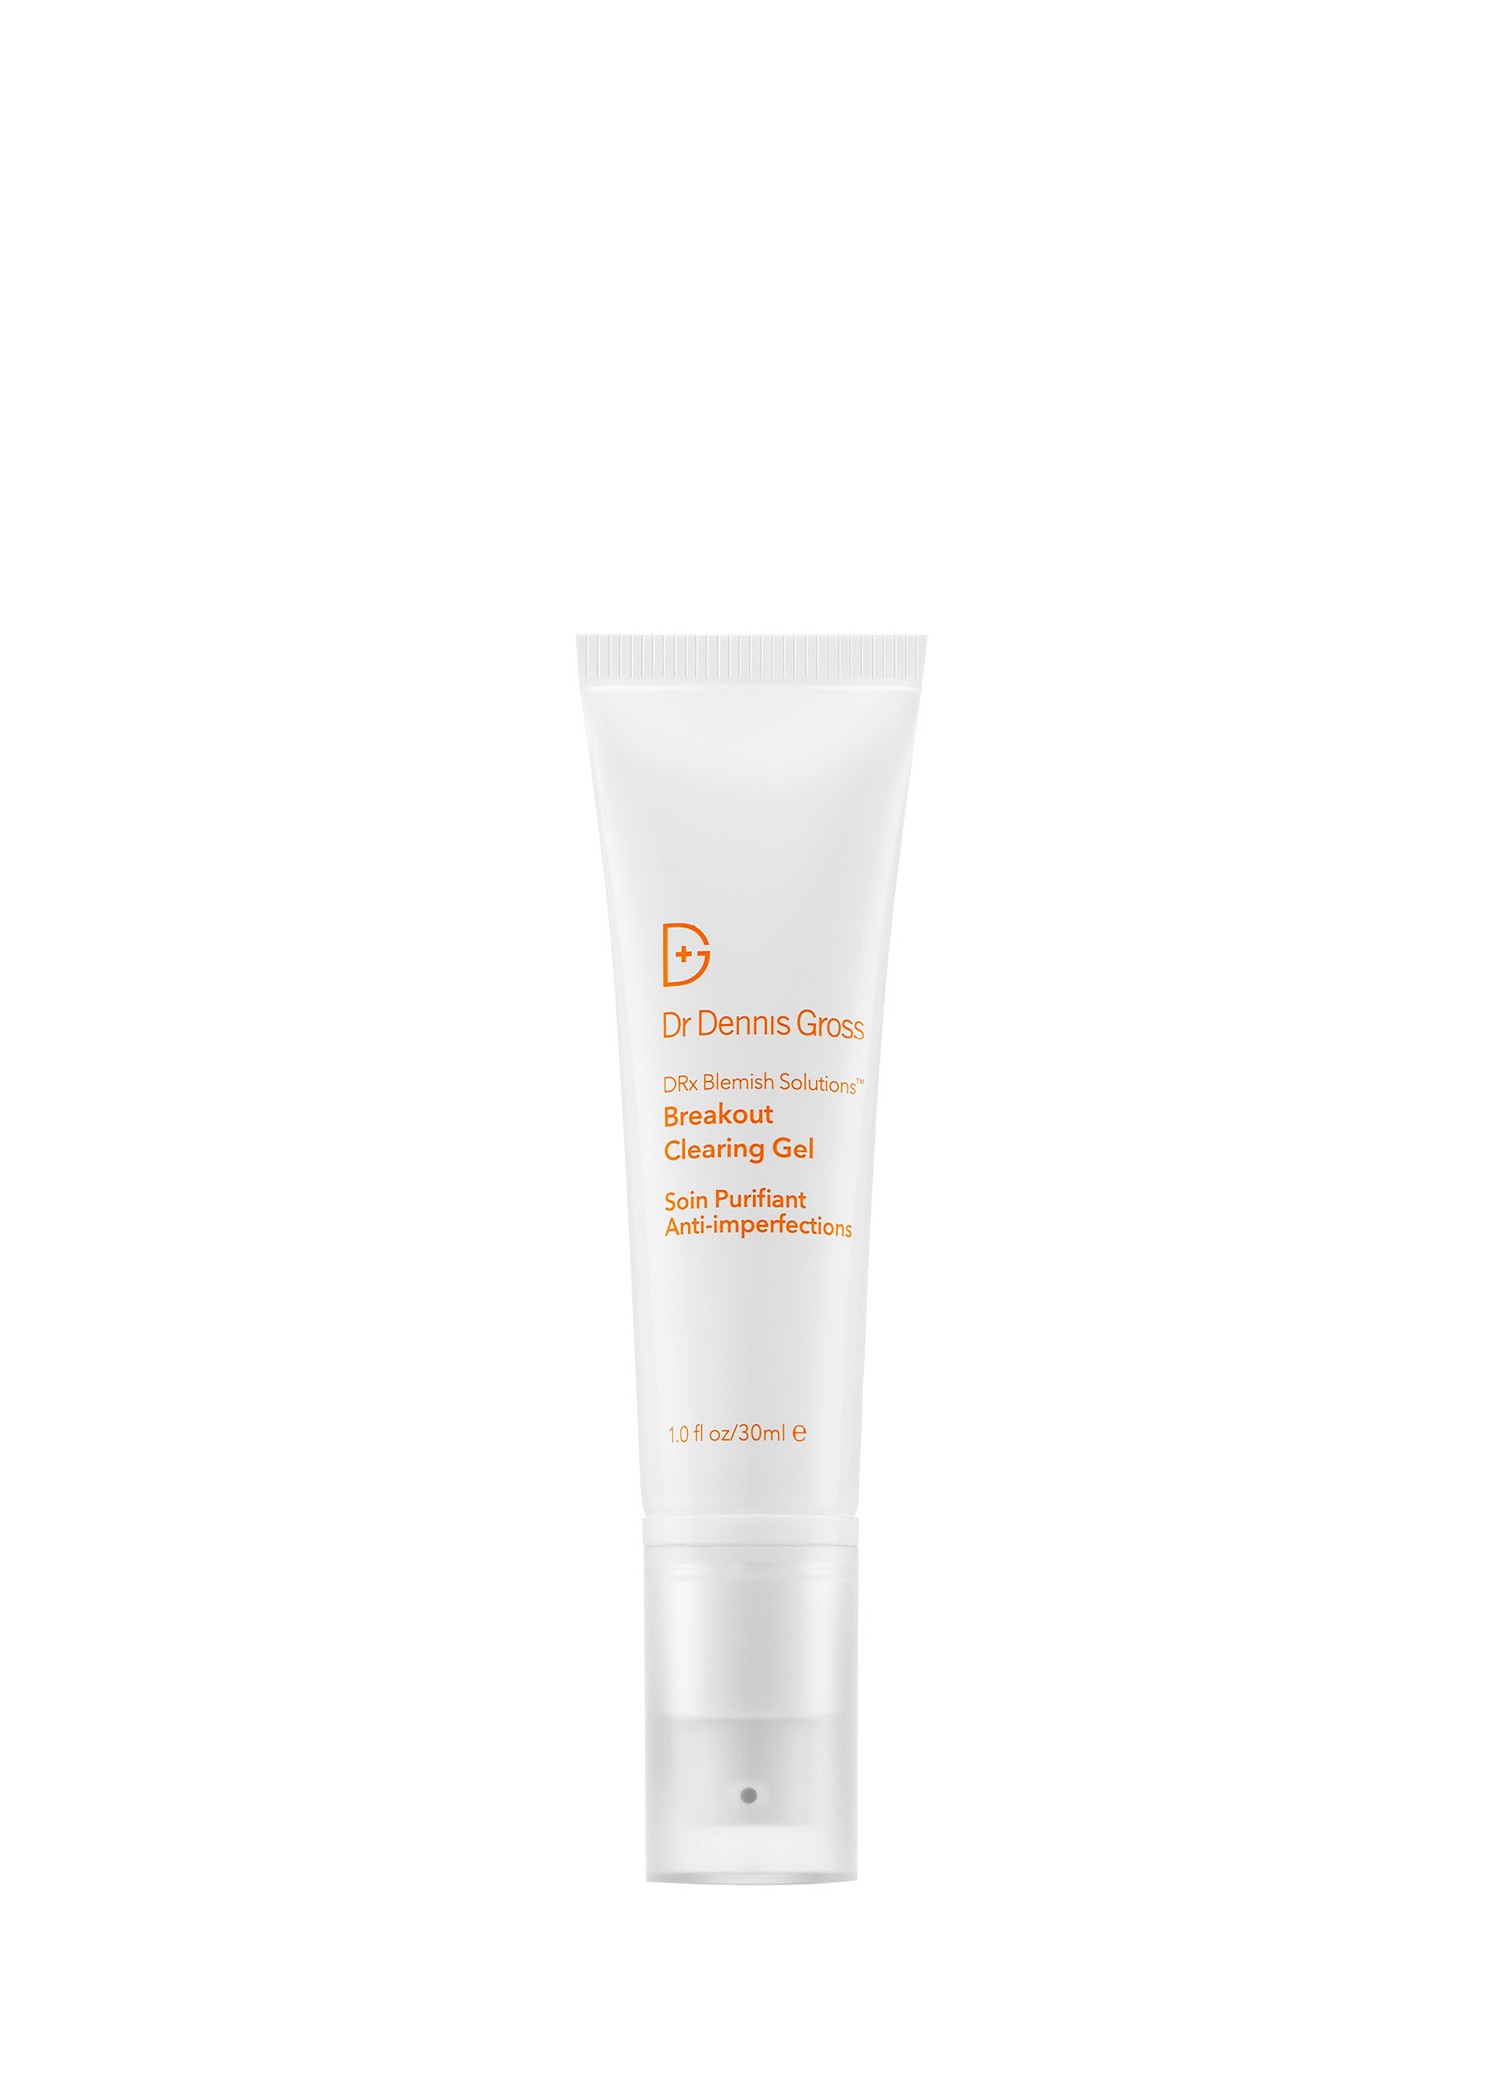 DRx Blemish Solutions Breakout Clearing Gel 30 ml